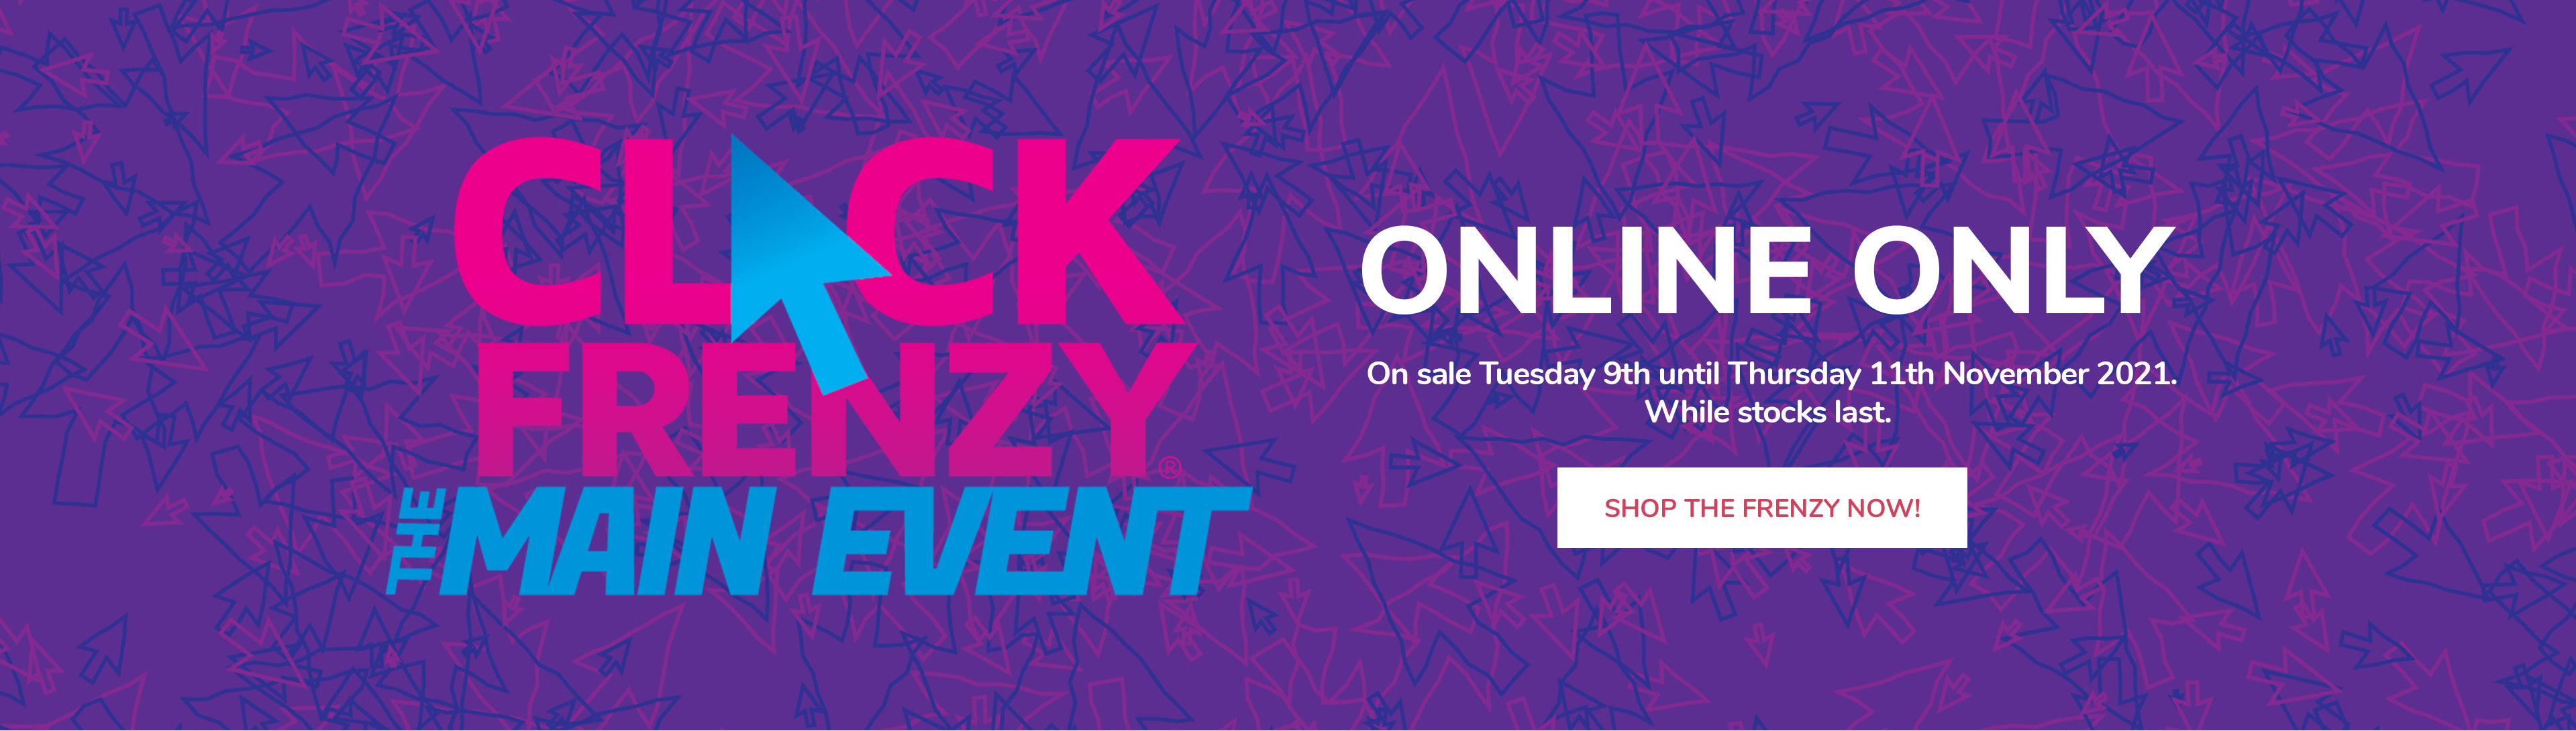 Click Frenzy sale up to 40% OFF on electrical, homeware, clothing & more